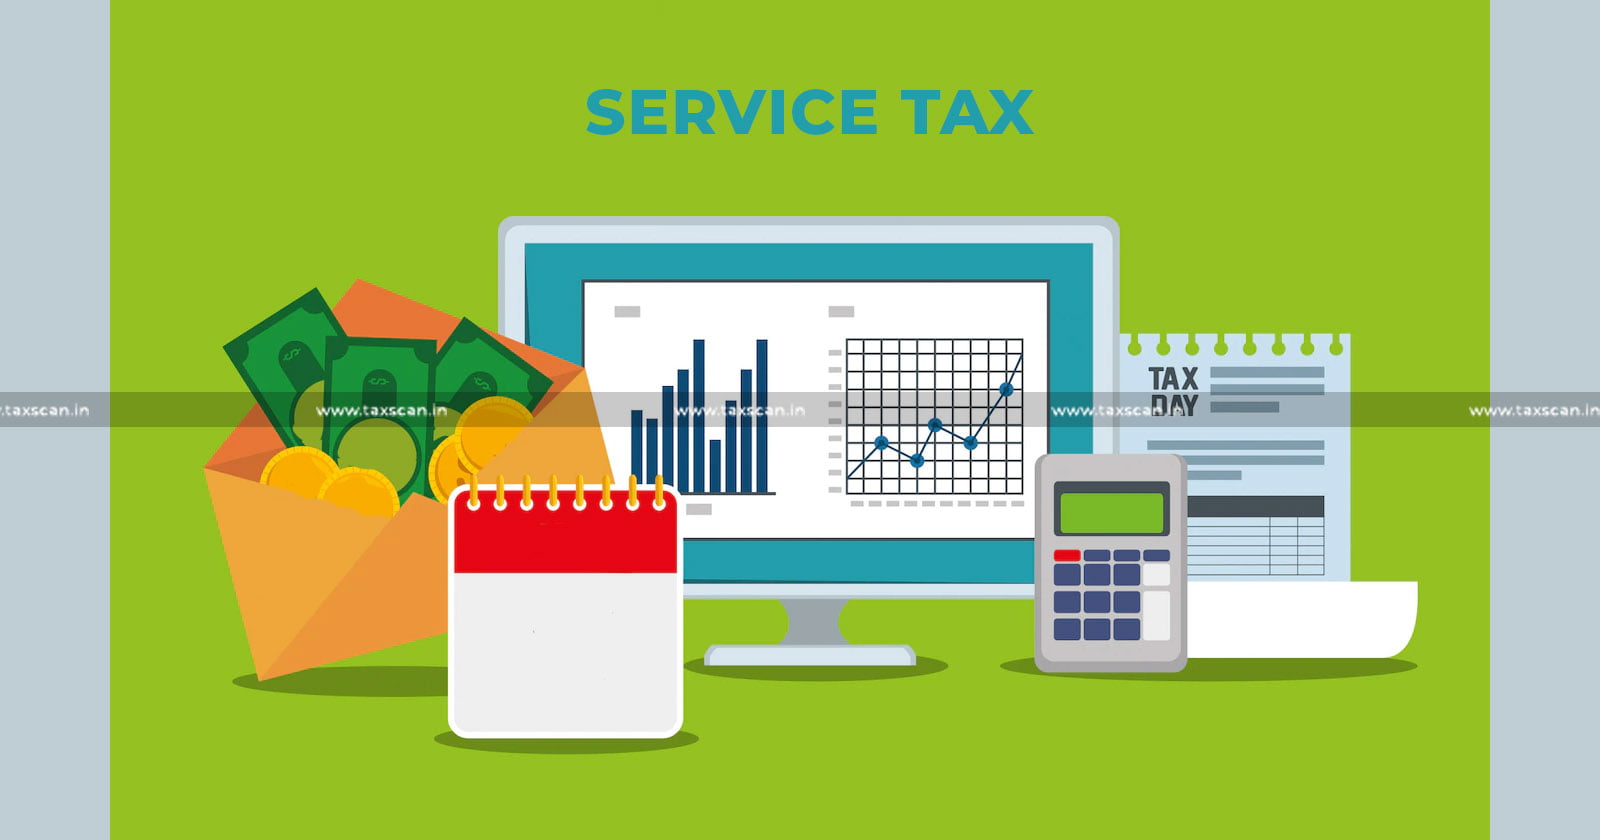 Service Tax - Commercial - Industrial - Construction Service - Work Contract - Customs - Excise CESTAT - taxscan